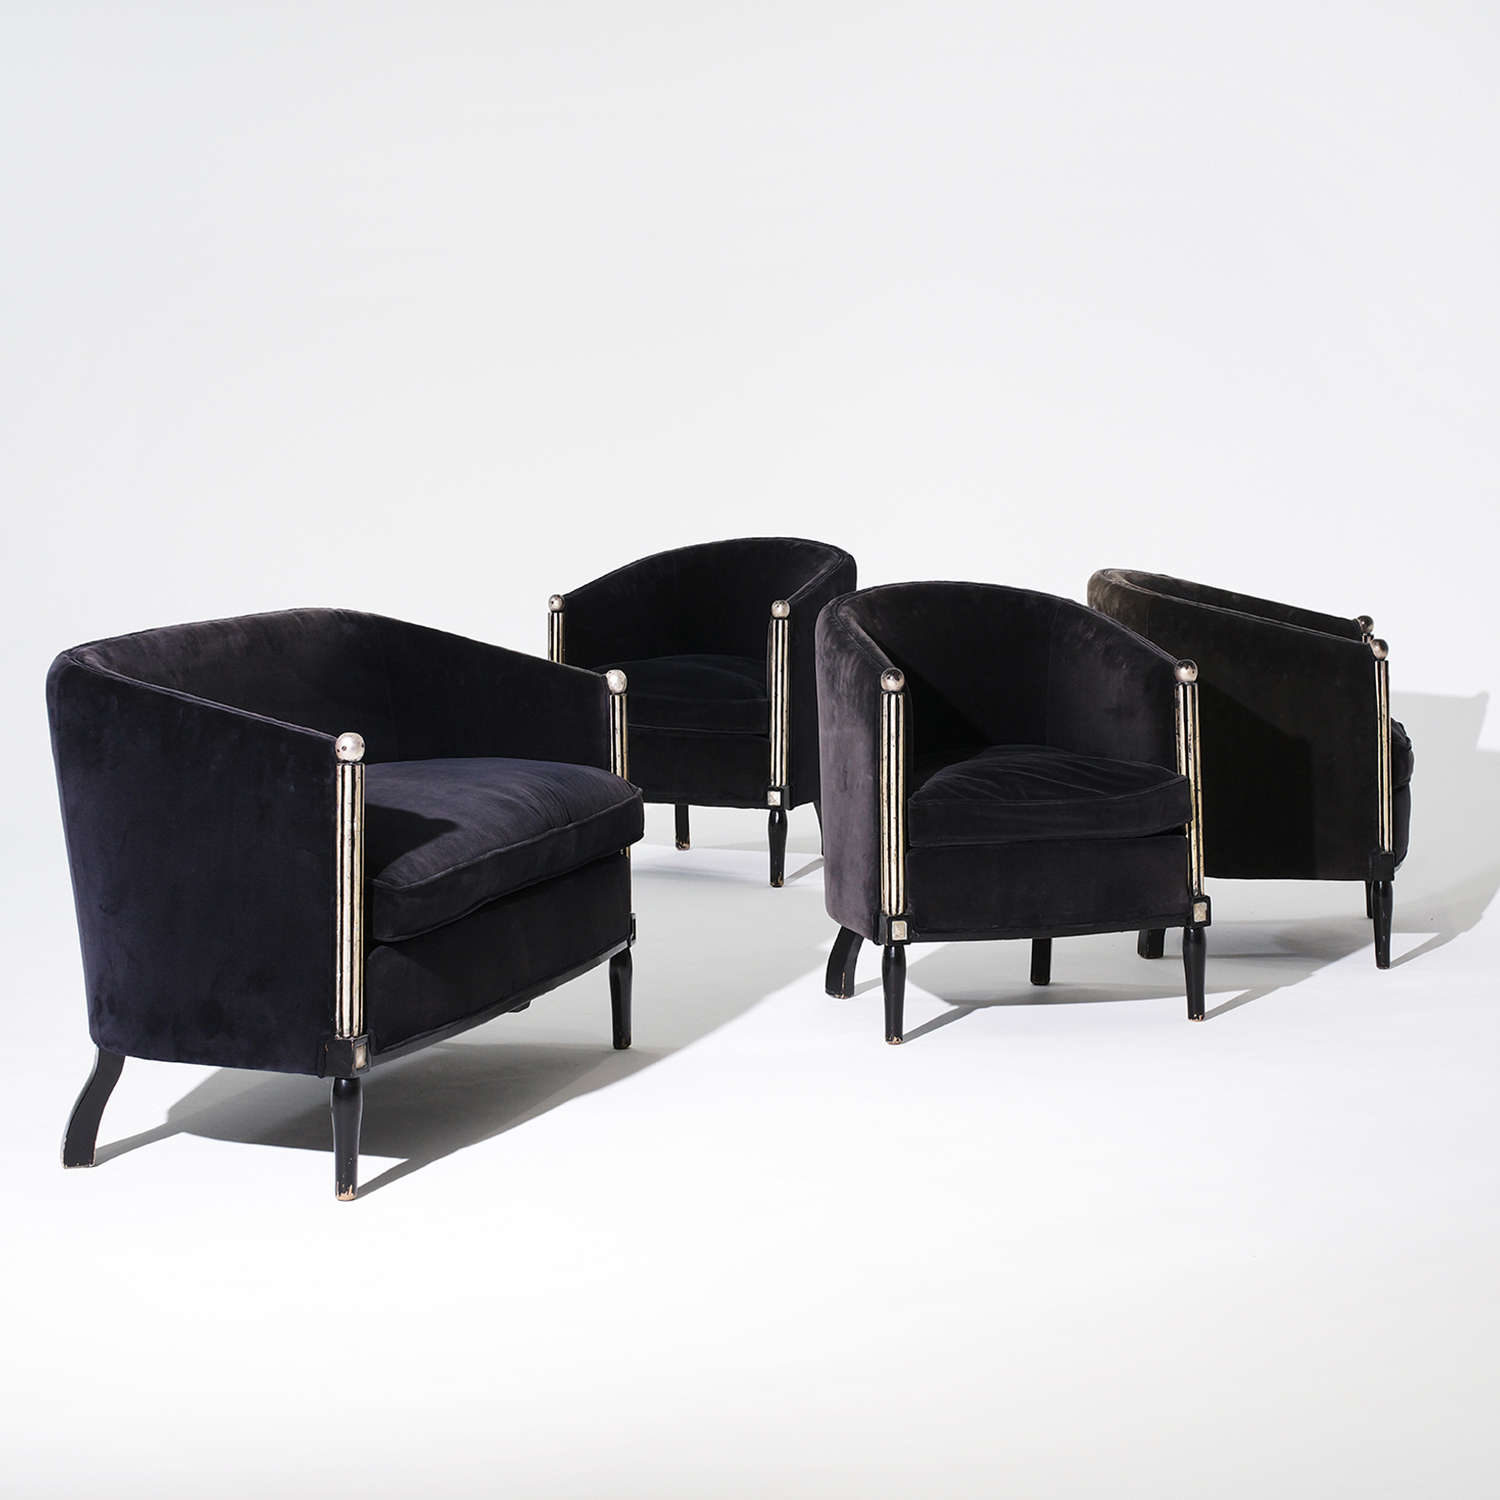 A vintage set of three French Art Deco chairs and sofa upholstered in a black velvet fabric. Circa 1930, Paris, France.